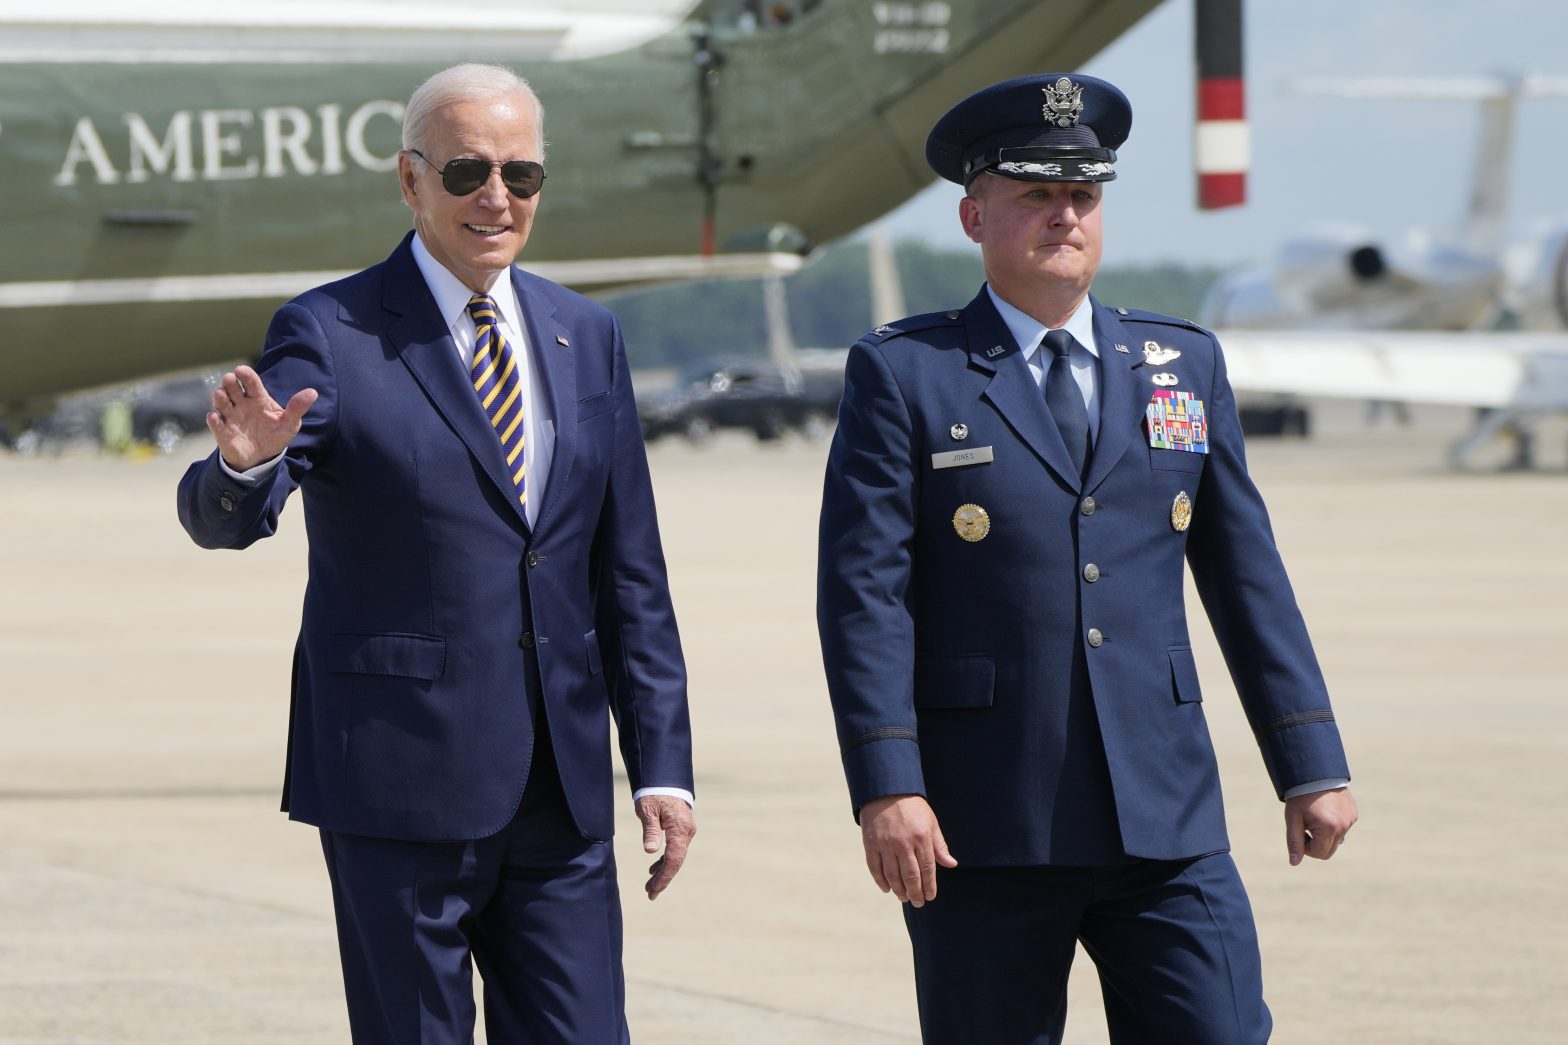 Biden Travels to Wisconsin to Talk About the Economy a Week Before GOP Debate